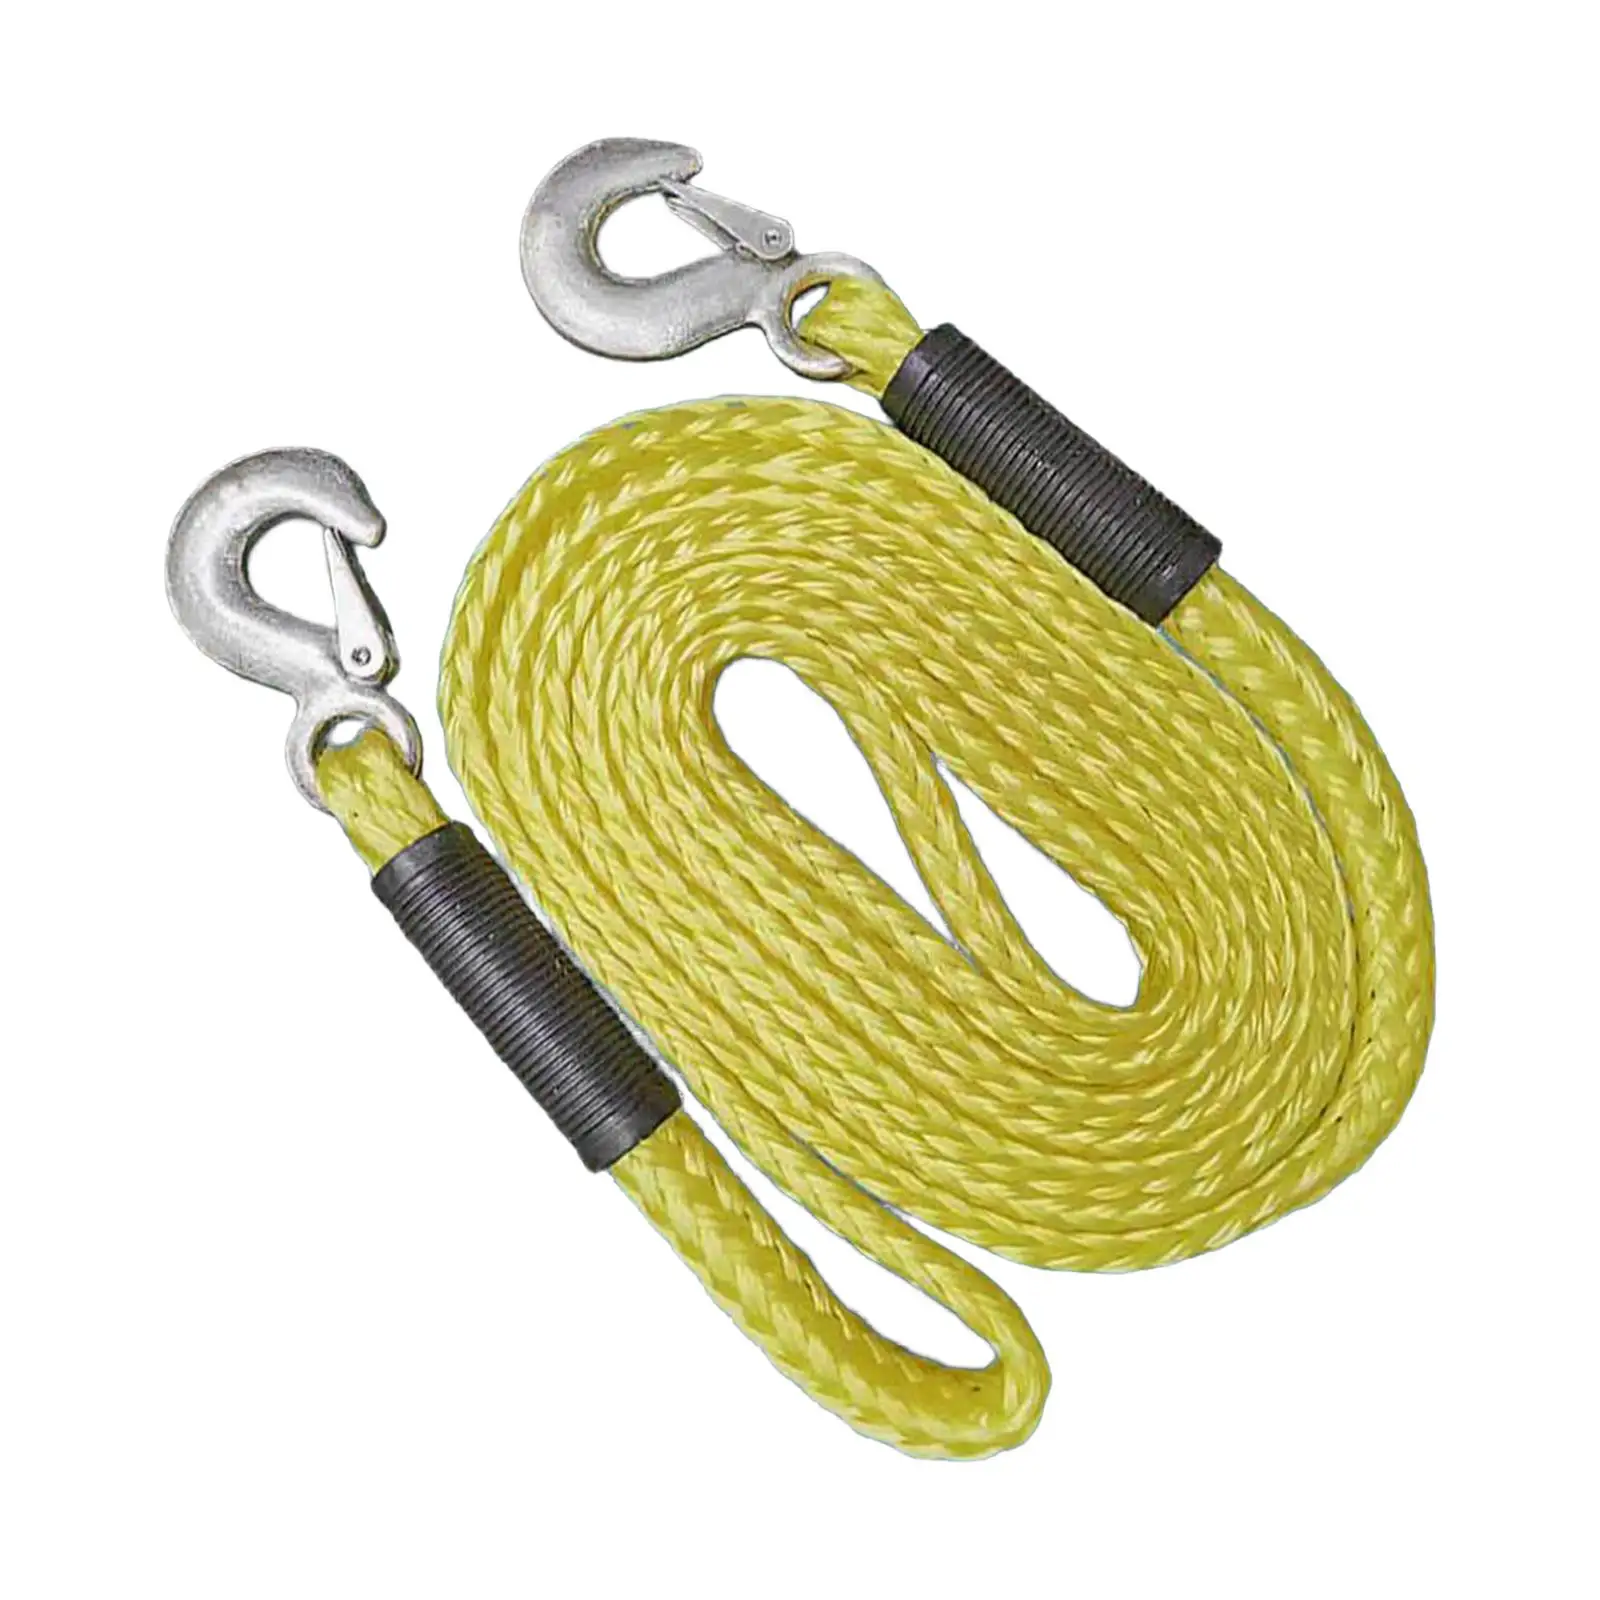 Tow Strap with Hooks Anti Slip Tow Rope for Stump Removal Emergency Vehicles